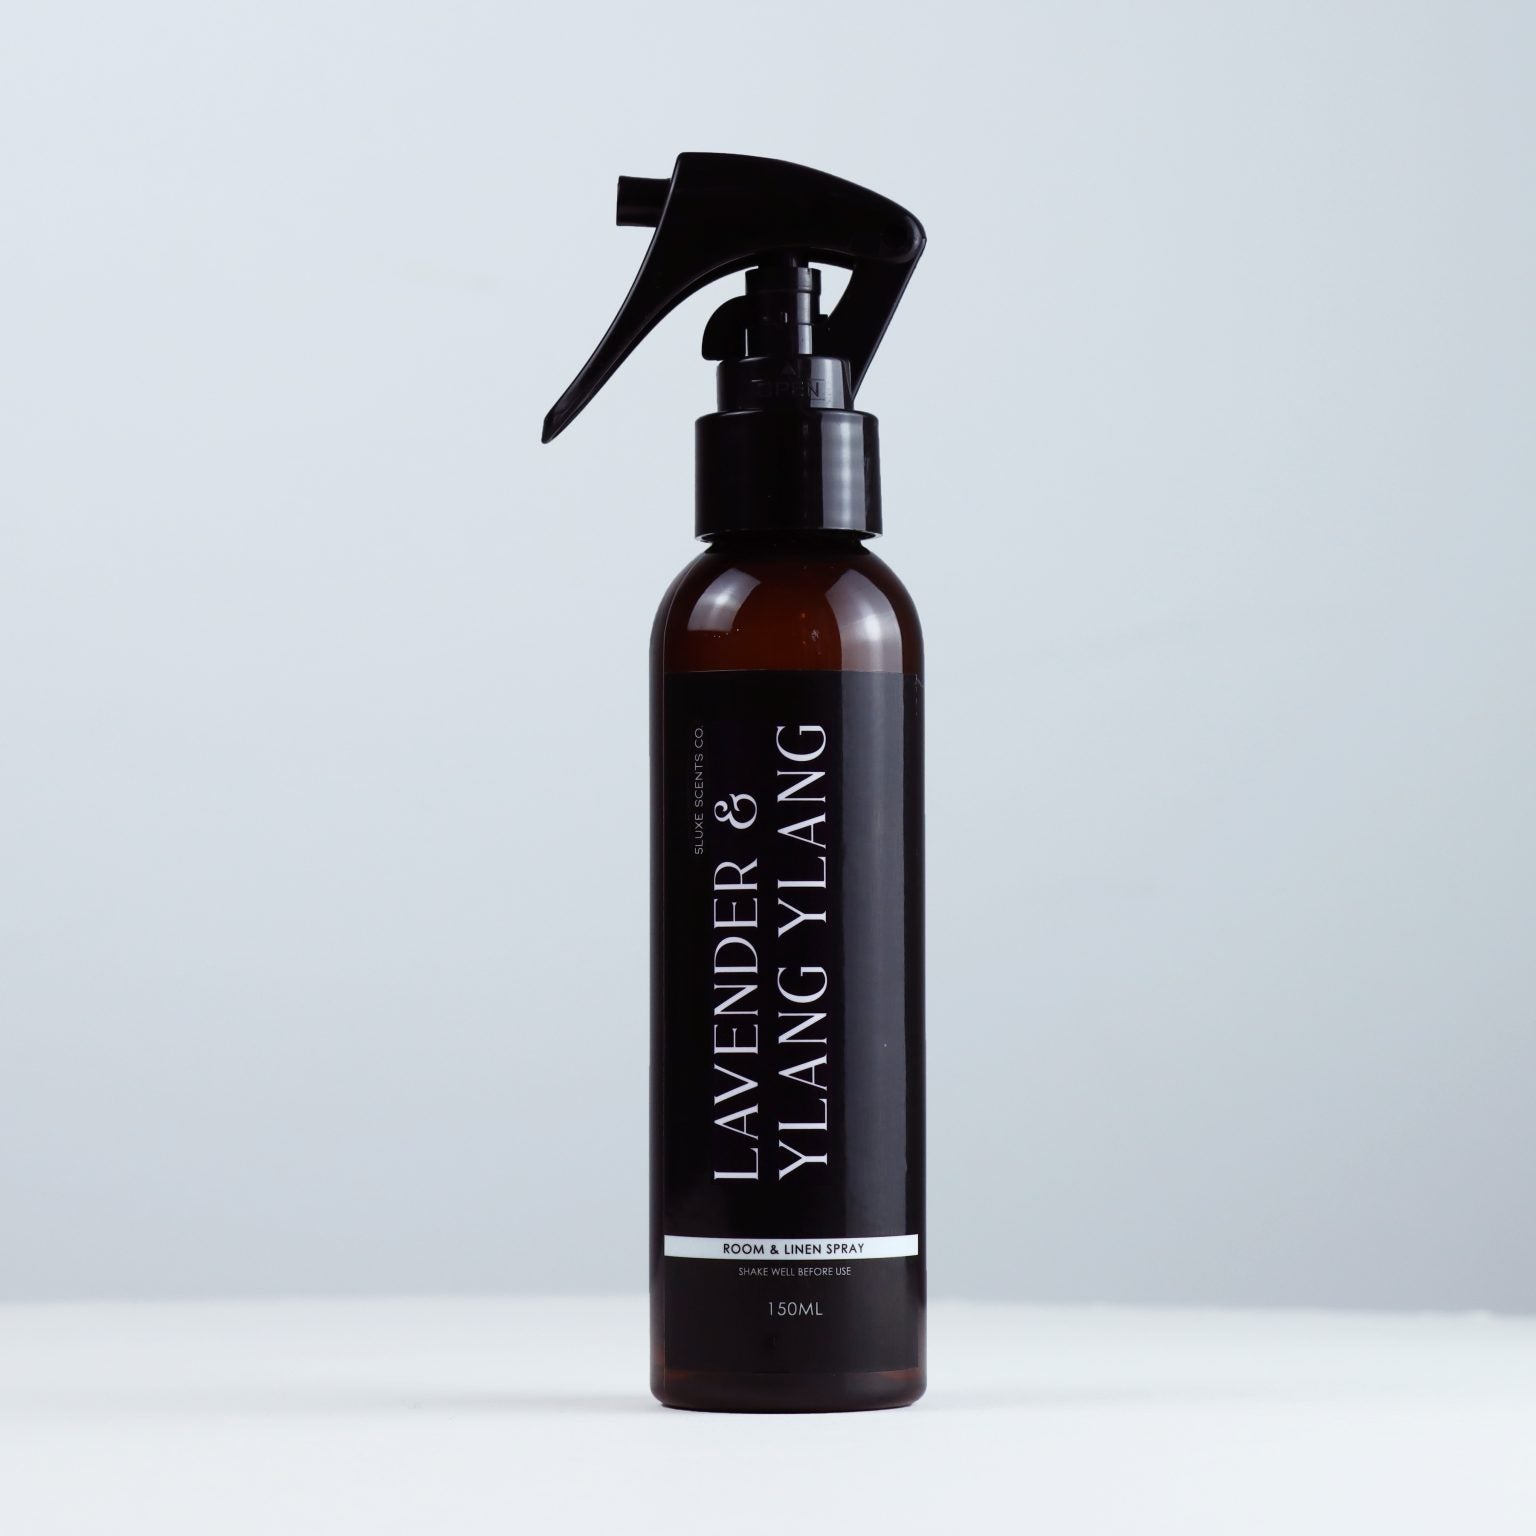 5 Luxe Room & Linen Spray (150ml) - Lavender & Ylang Ylang